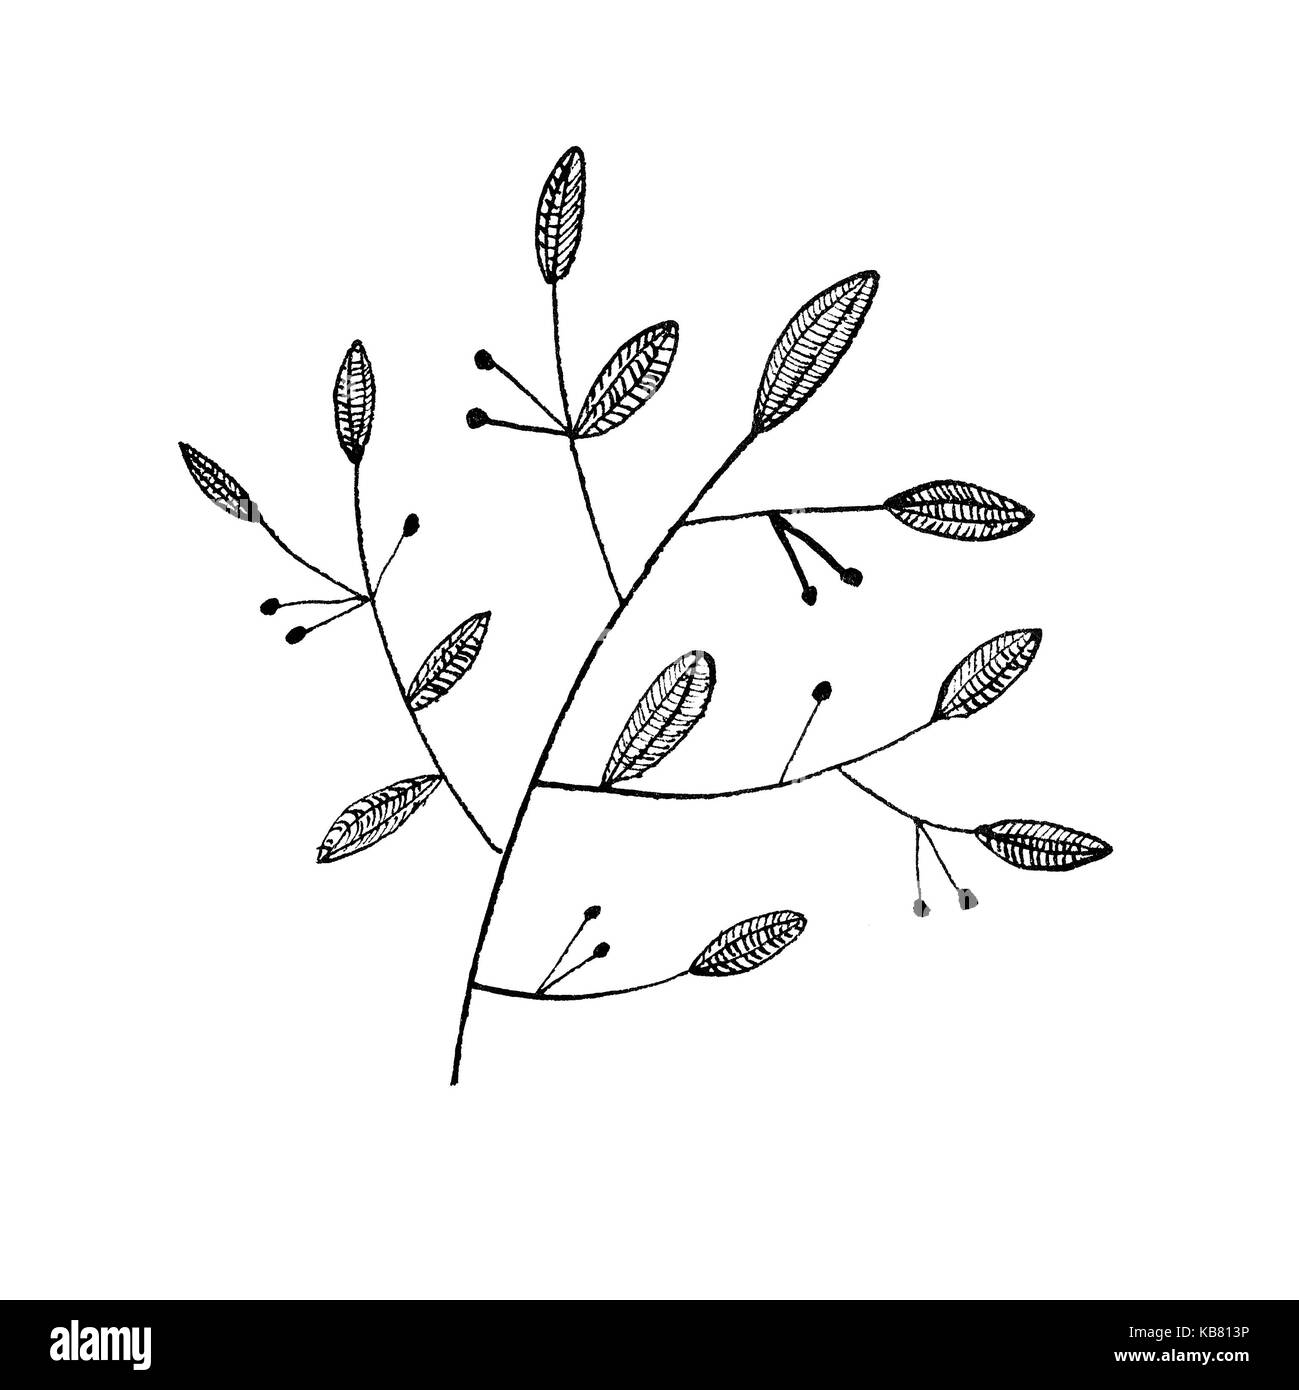 Ink drawing of floral pattern, autumn leaves, small berries on branch Stock Photo